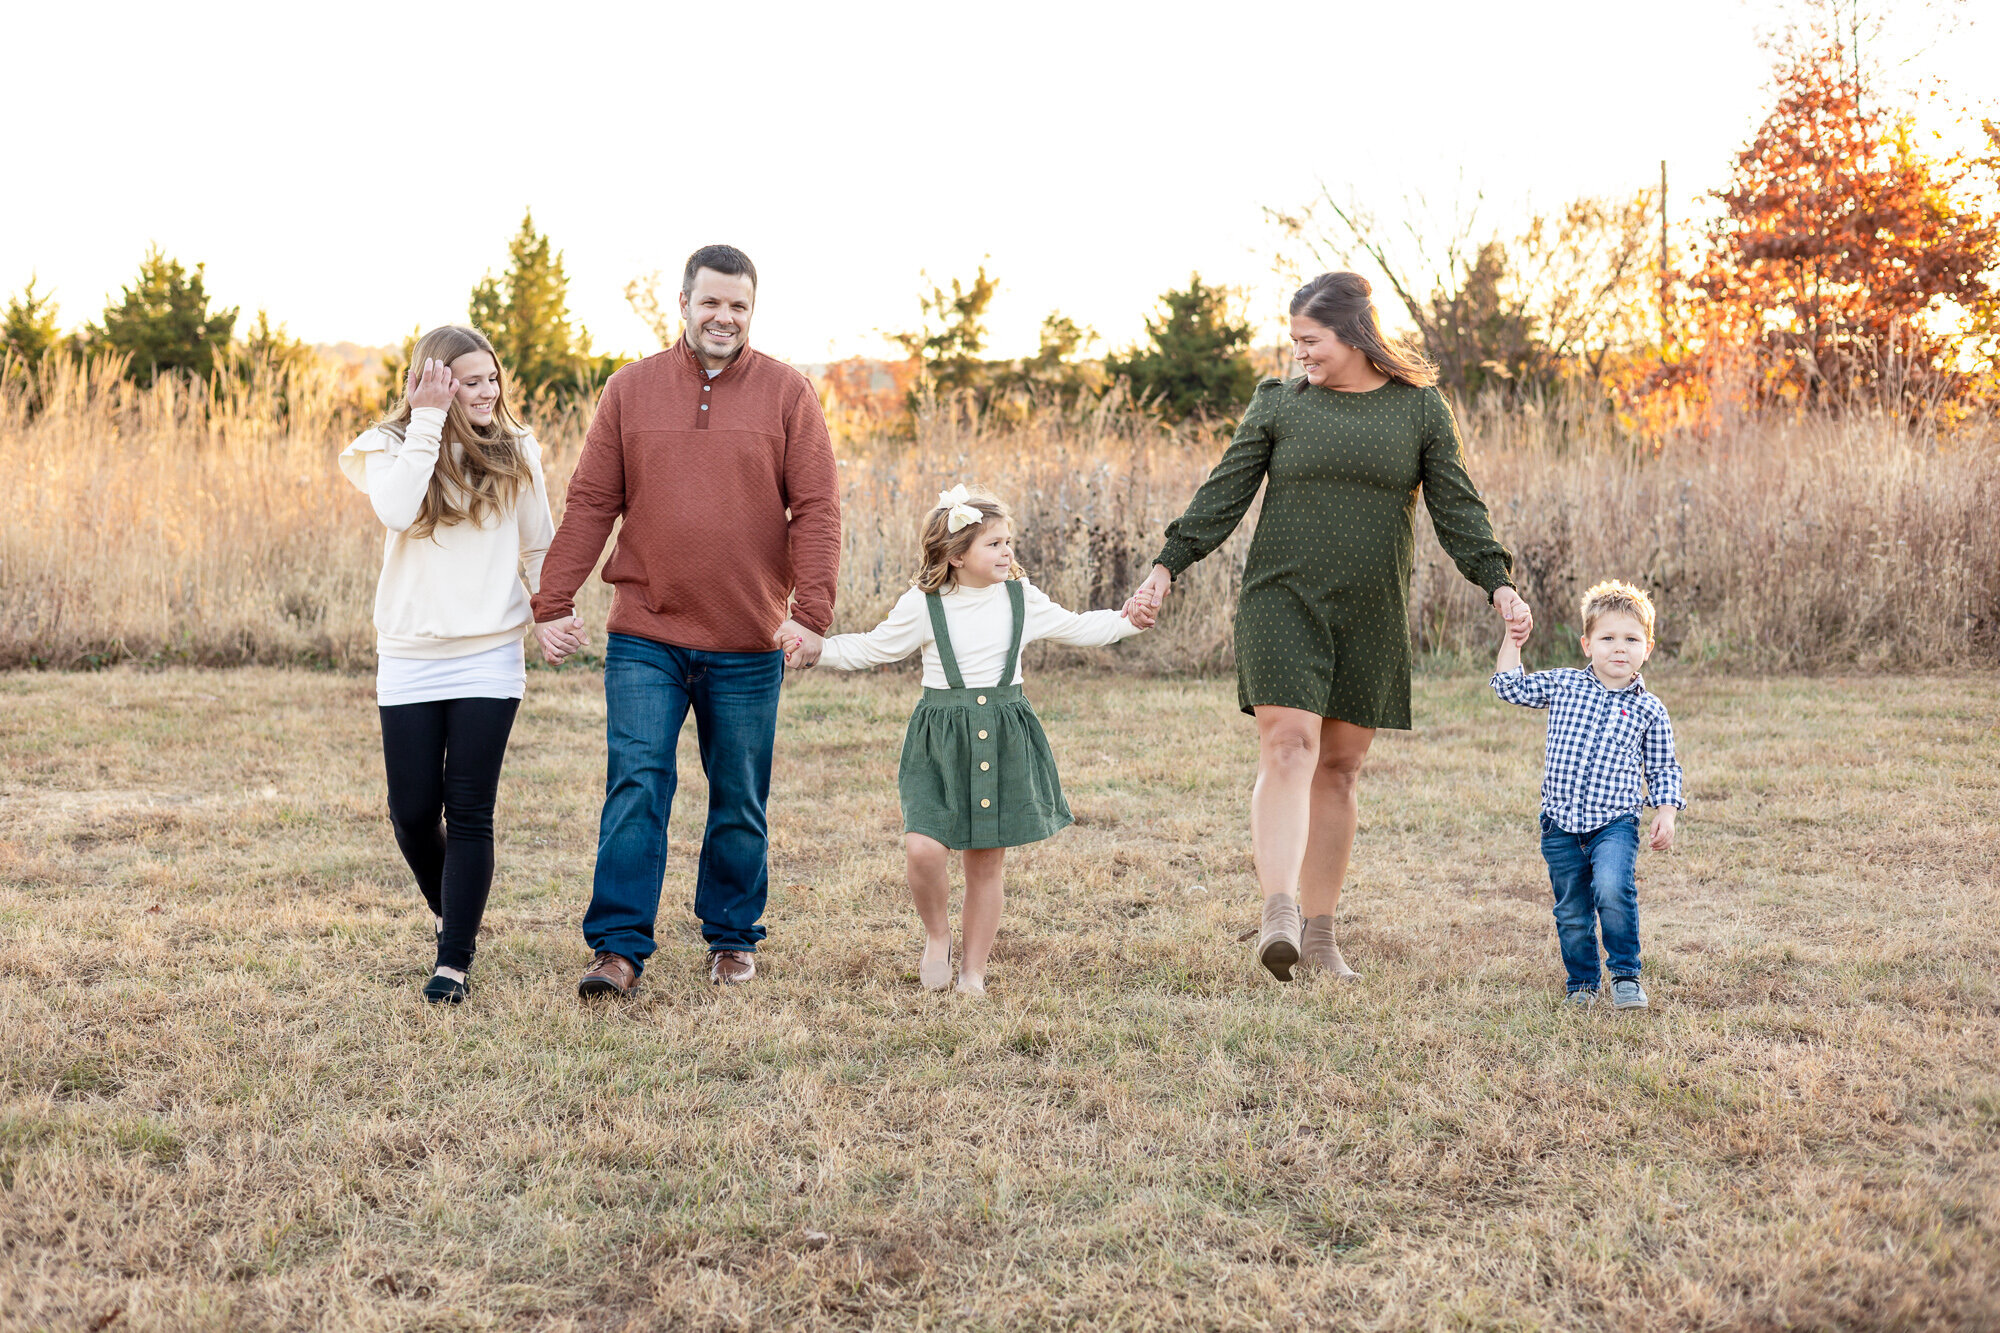 Outdoor-family-lifestyle-photography-session-Frankfort-KY-photographer-golden-hour-4